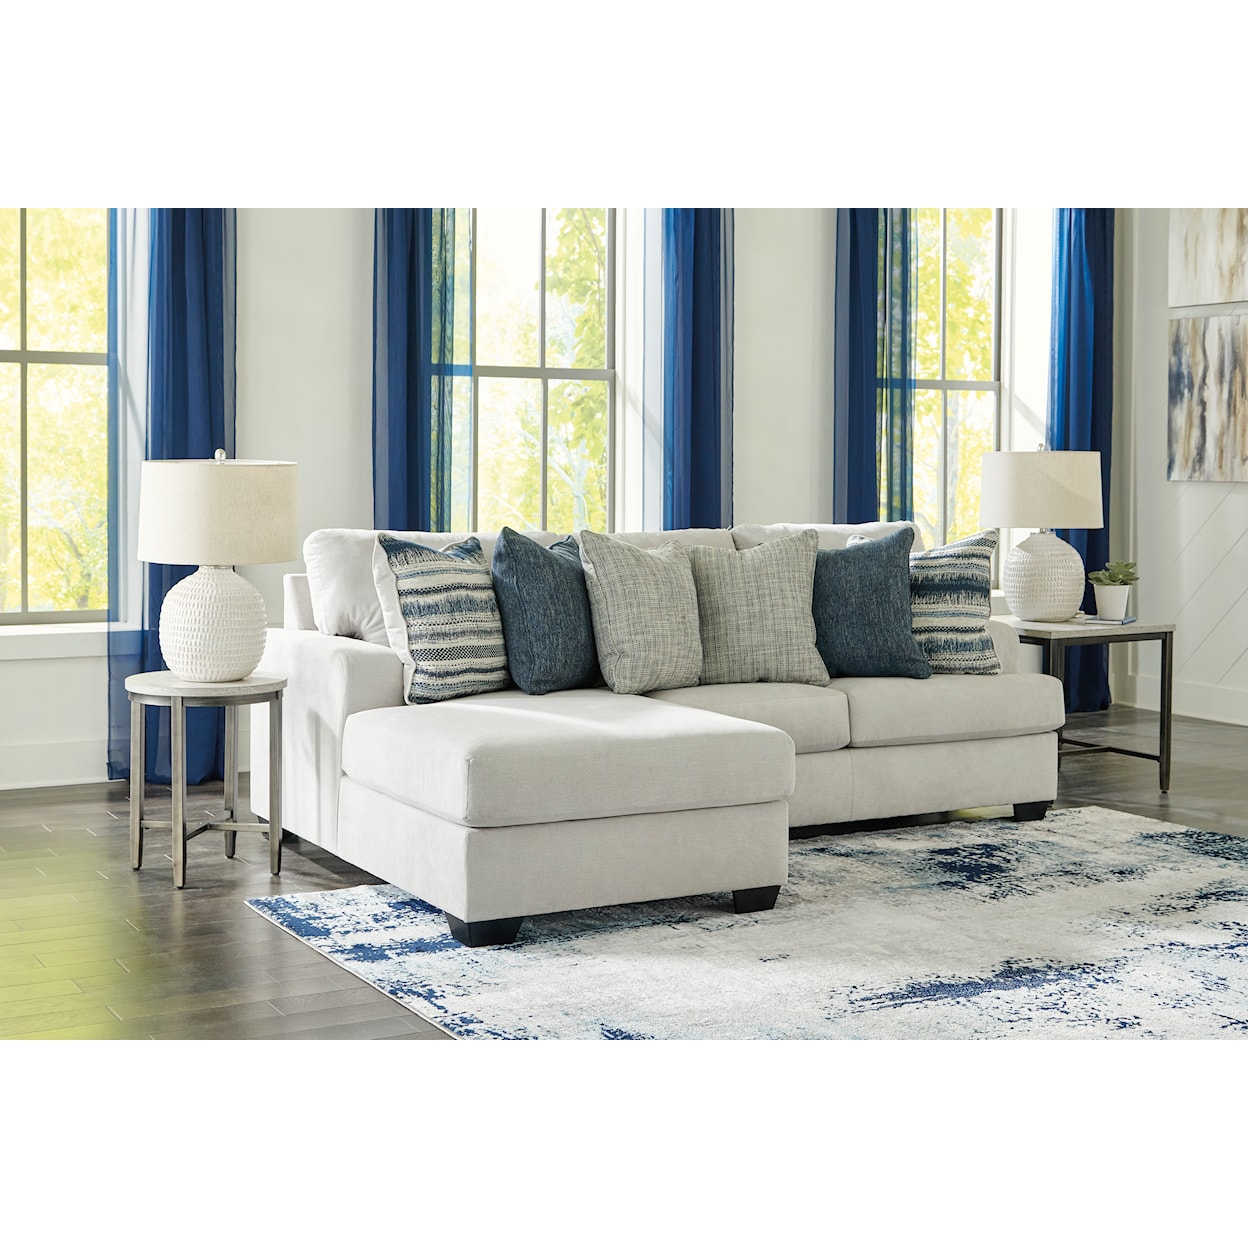 Ashley Furniture Benchcraft Lowder 2-Piece Sectional with Chaise